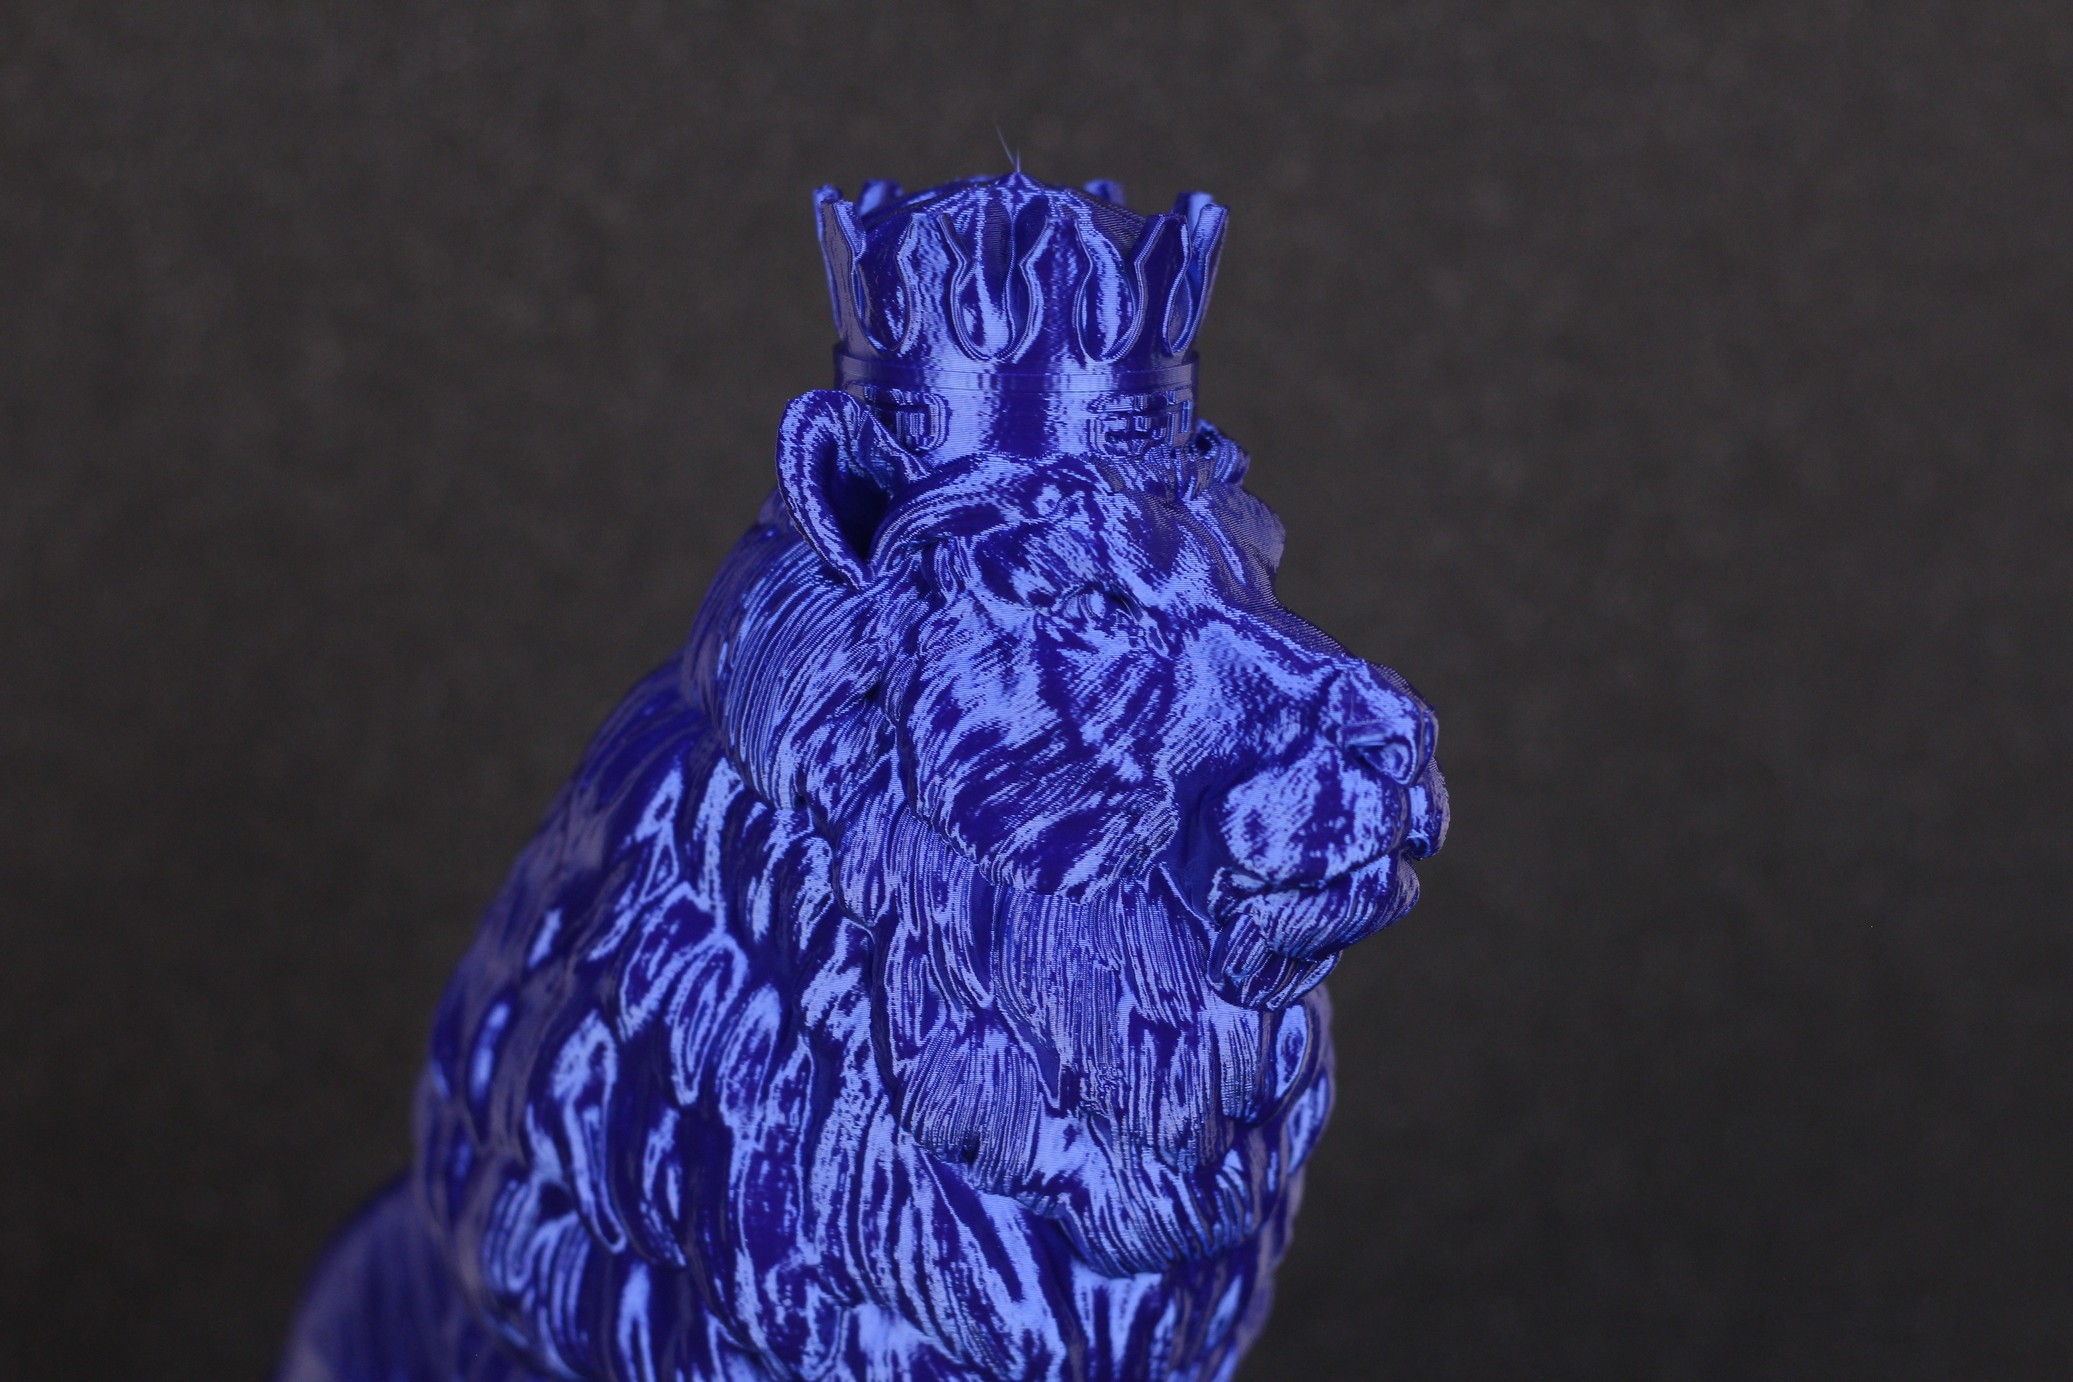 King Roary printed on Ender 3 S1 5 | Creality Ender 3 S1 Review: Almost Perfect